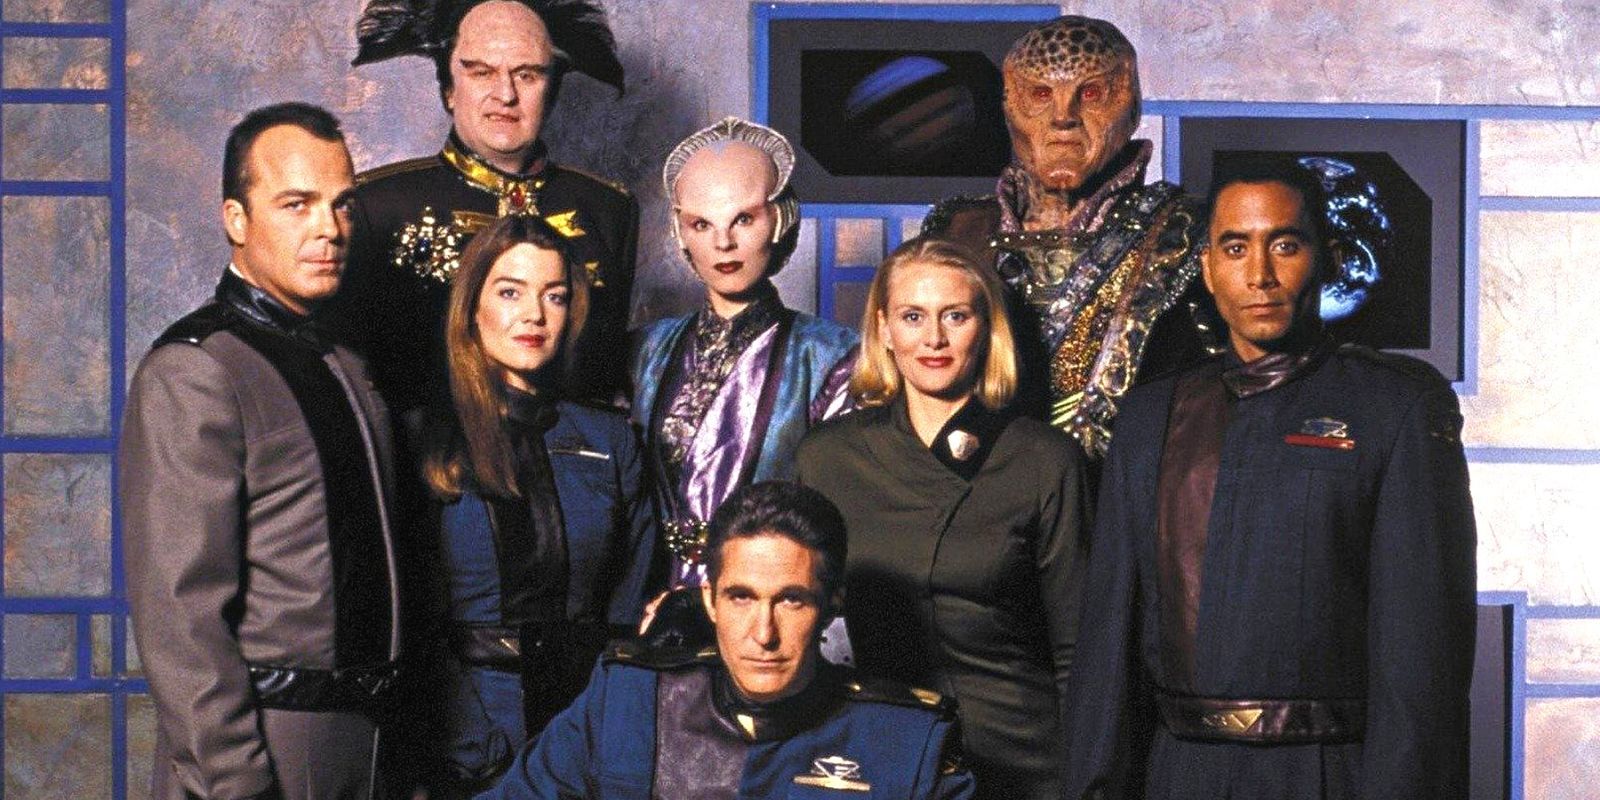 The cast of Babylon 5, aliens and humans alike, posing for a group photo